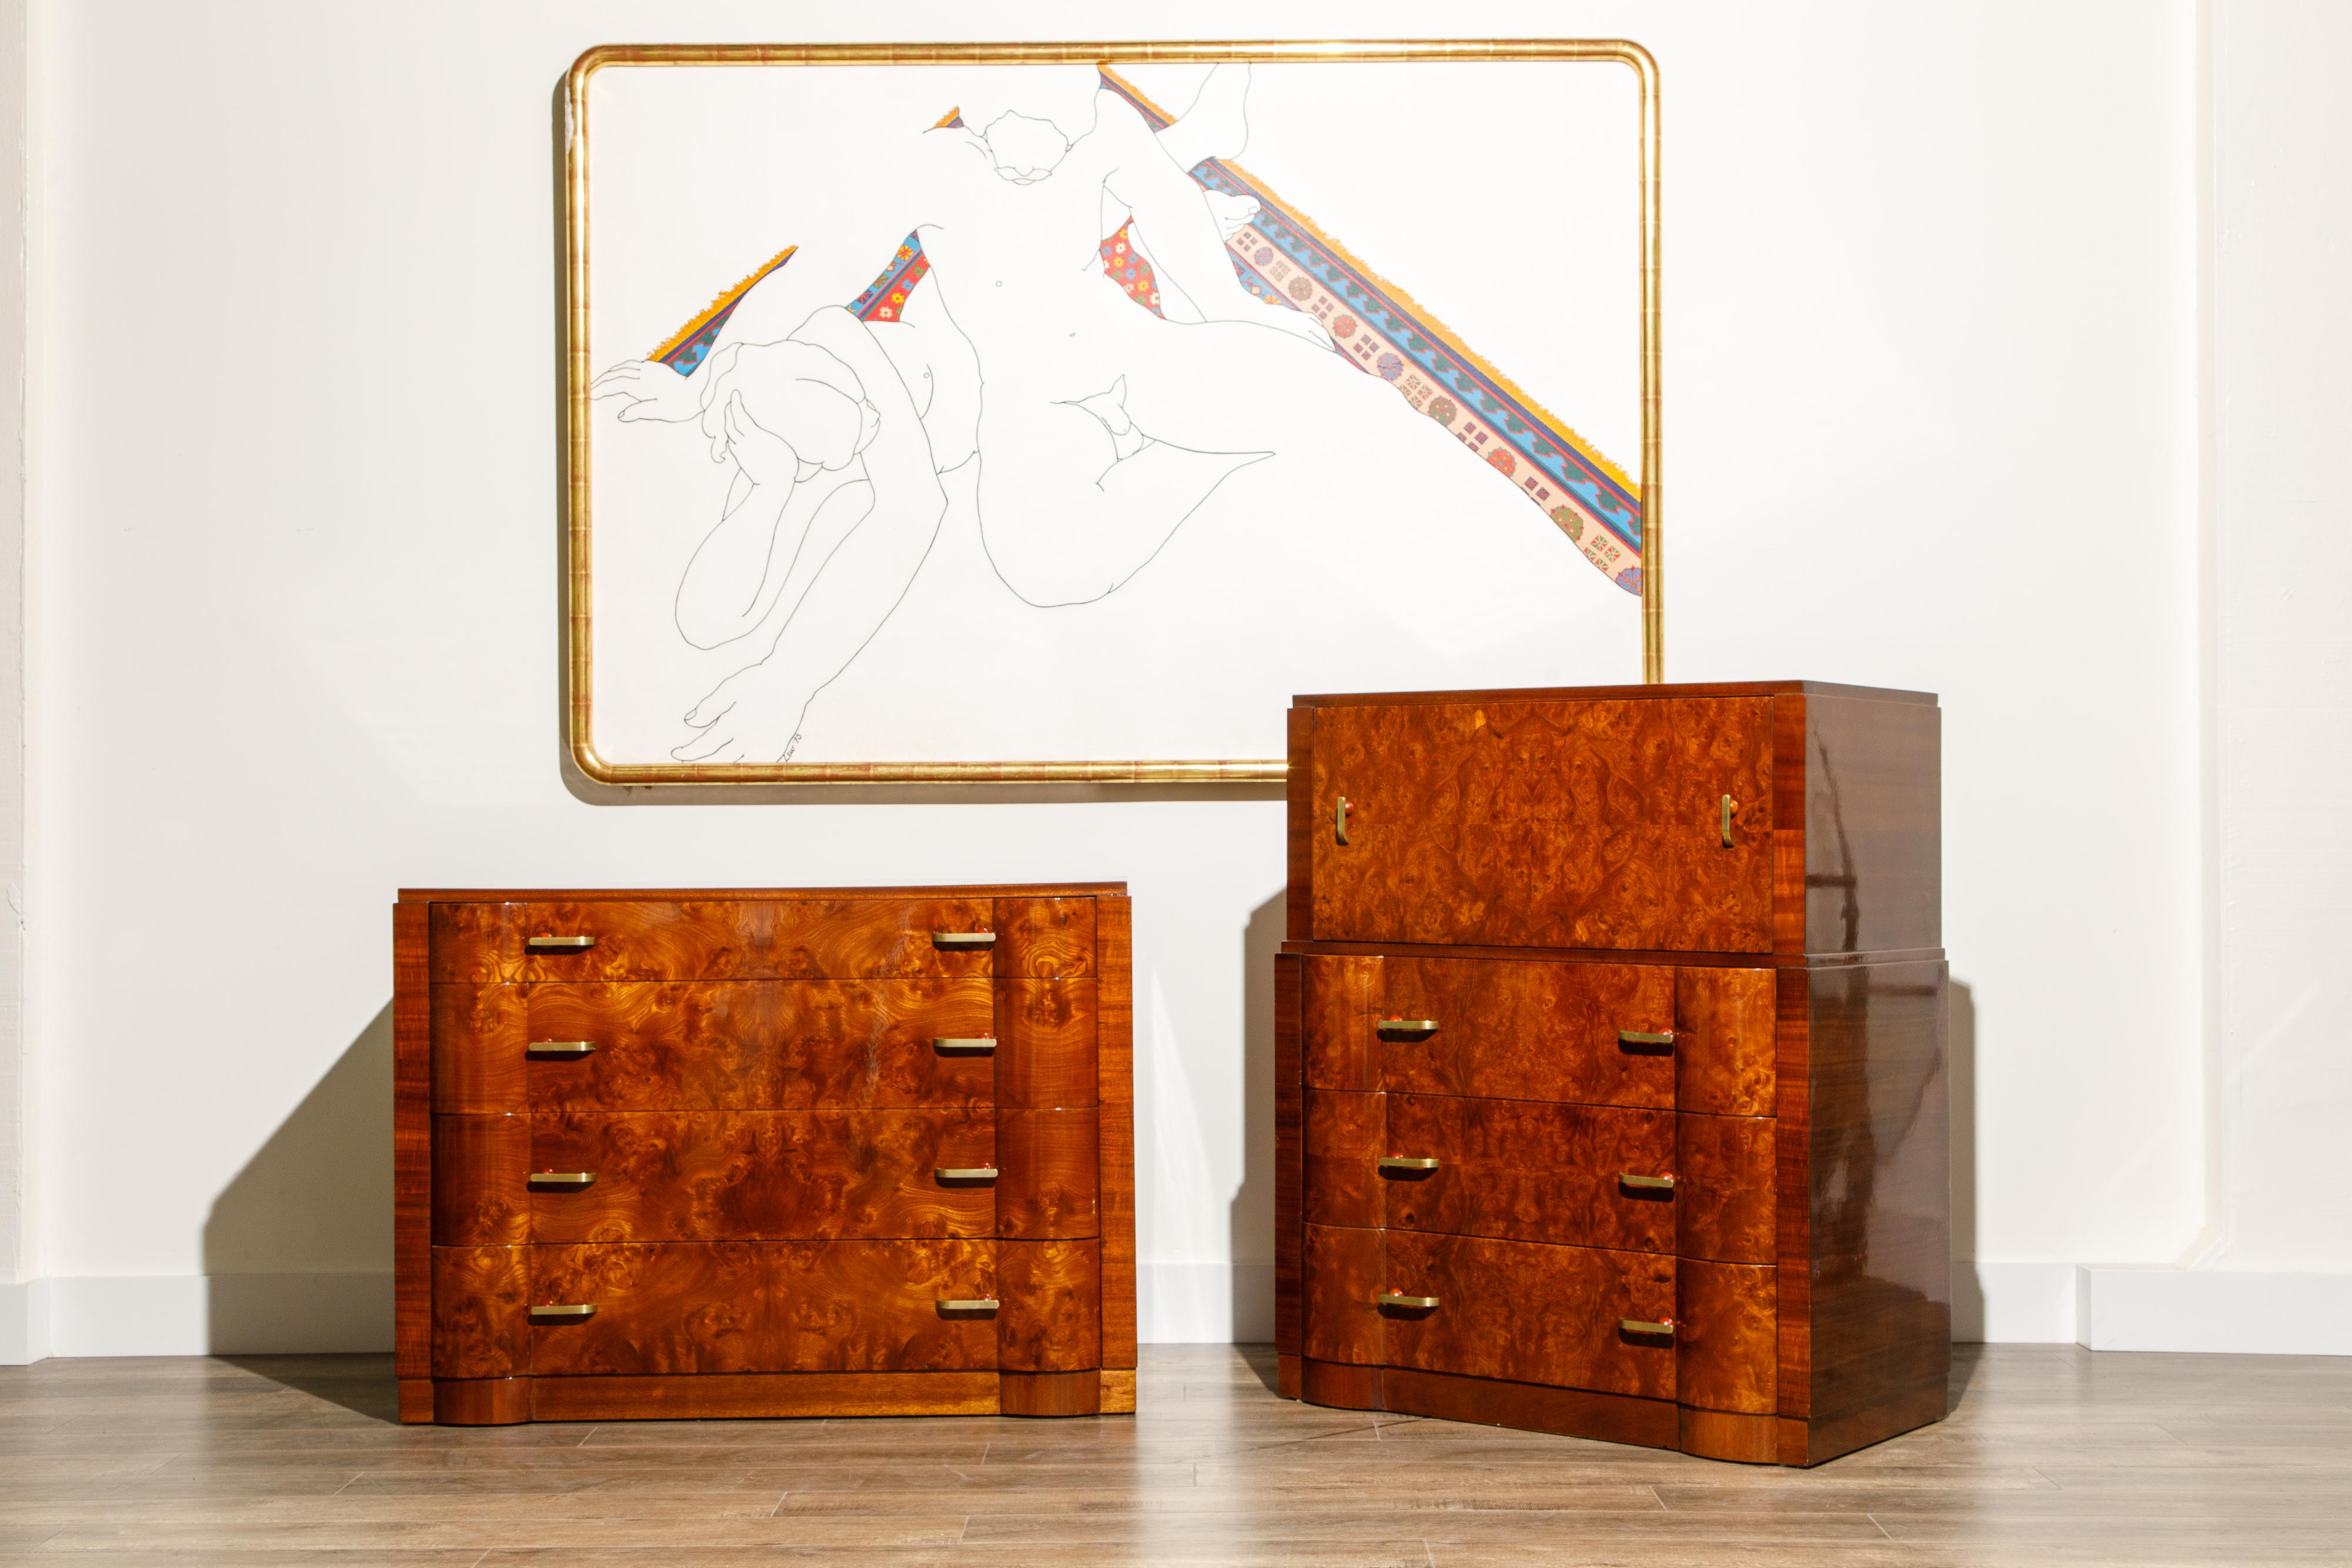 This magnificent pair of circa 1930s Art Deco Burlwood dressers were just refinished in a gorgeous French Polish which is the most luxurious, expensive and laborious finish available, providing amazing depth and detail to the exotic wood grain and